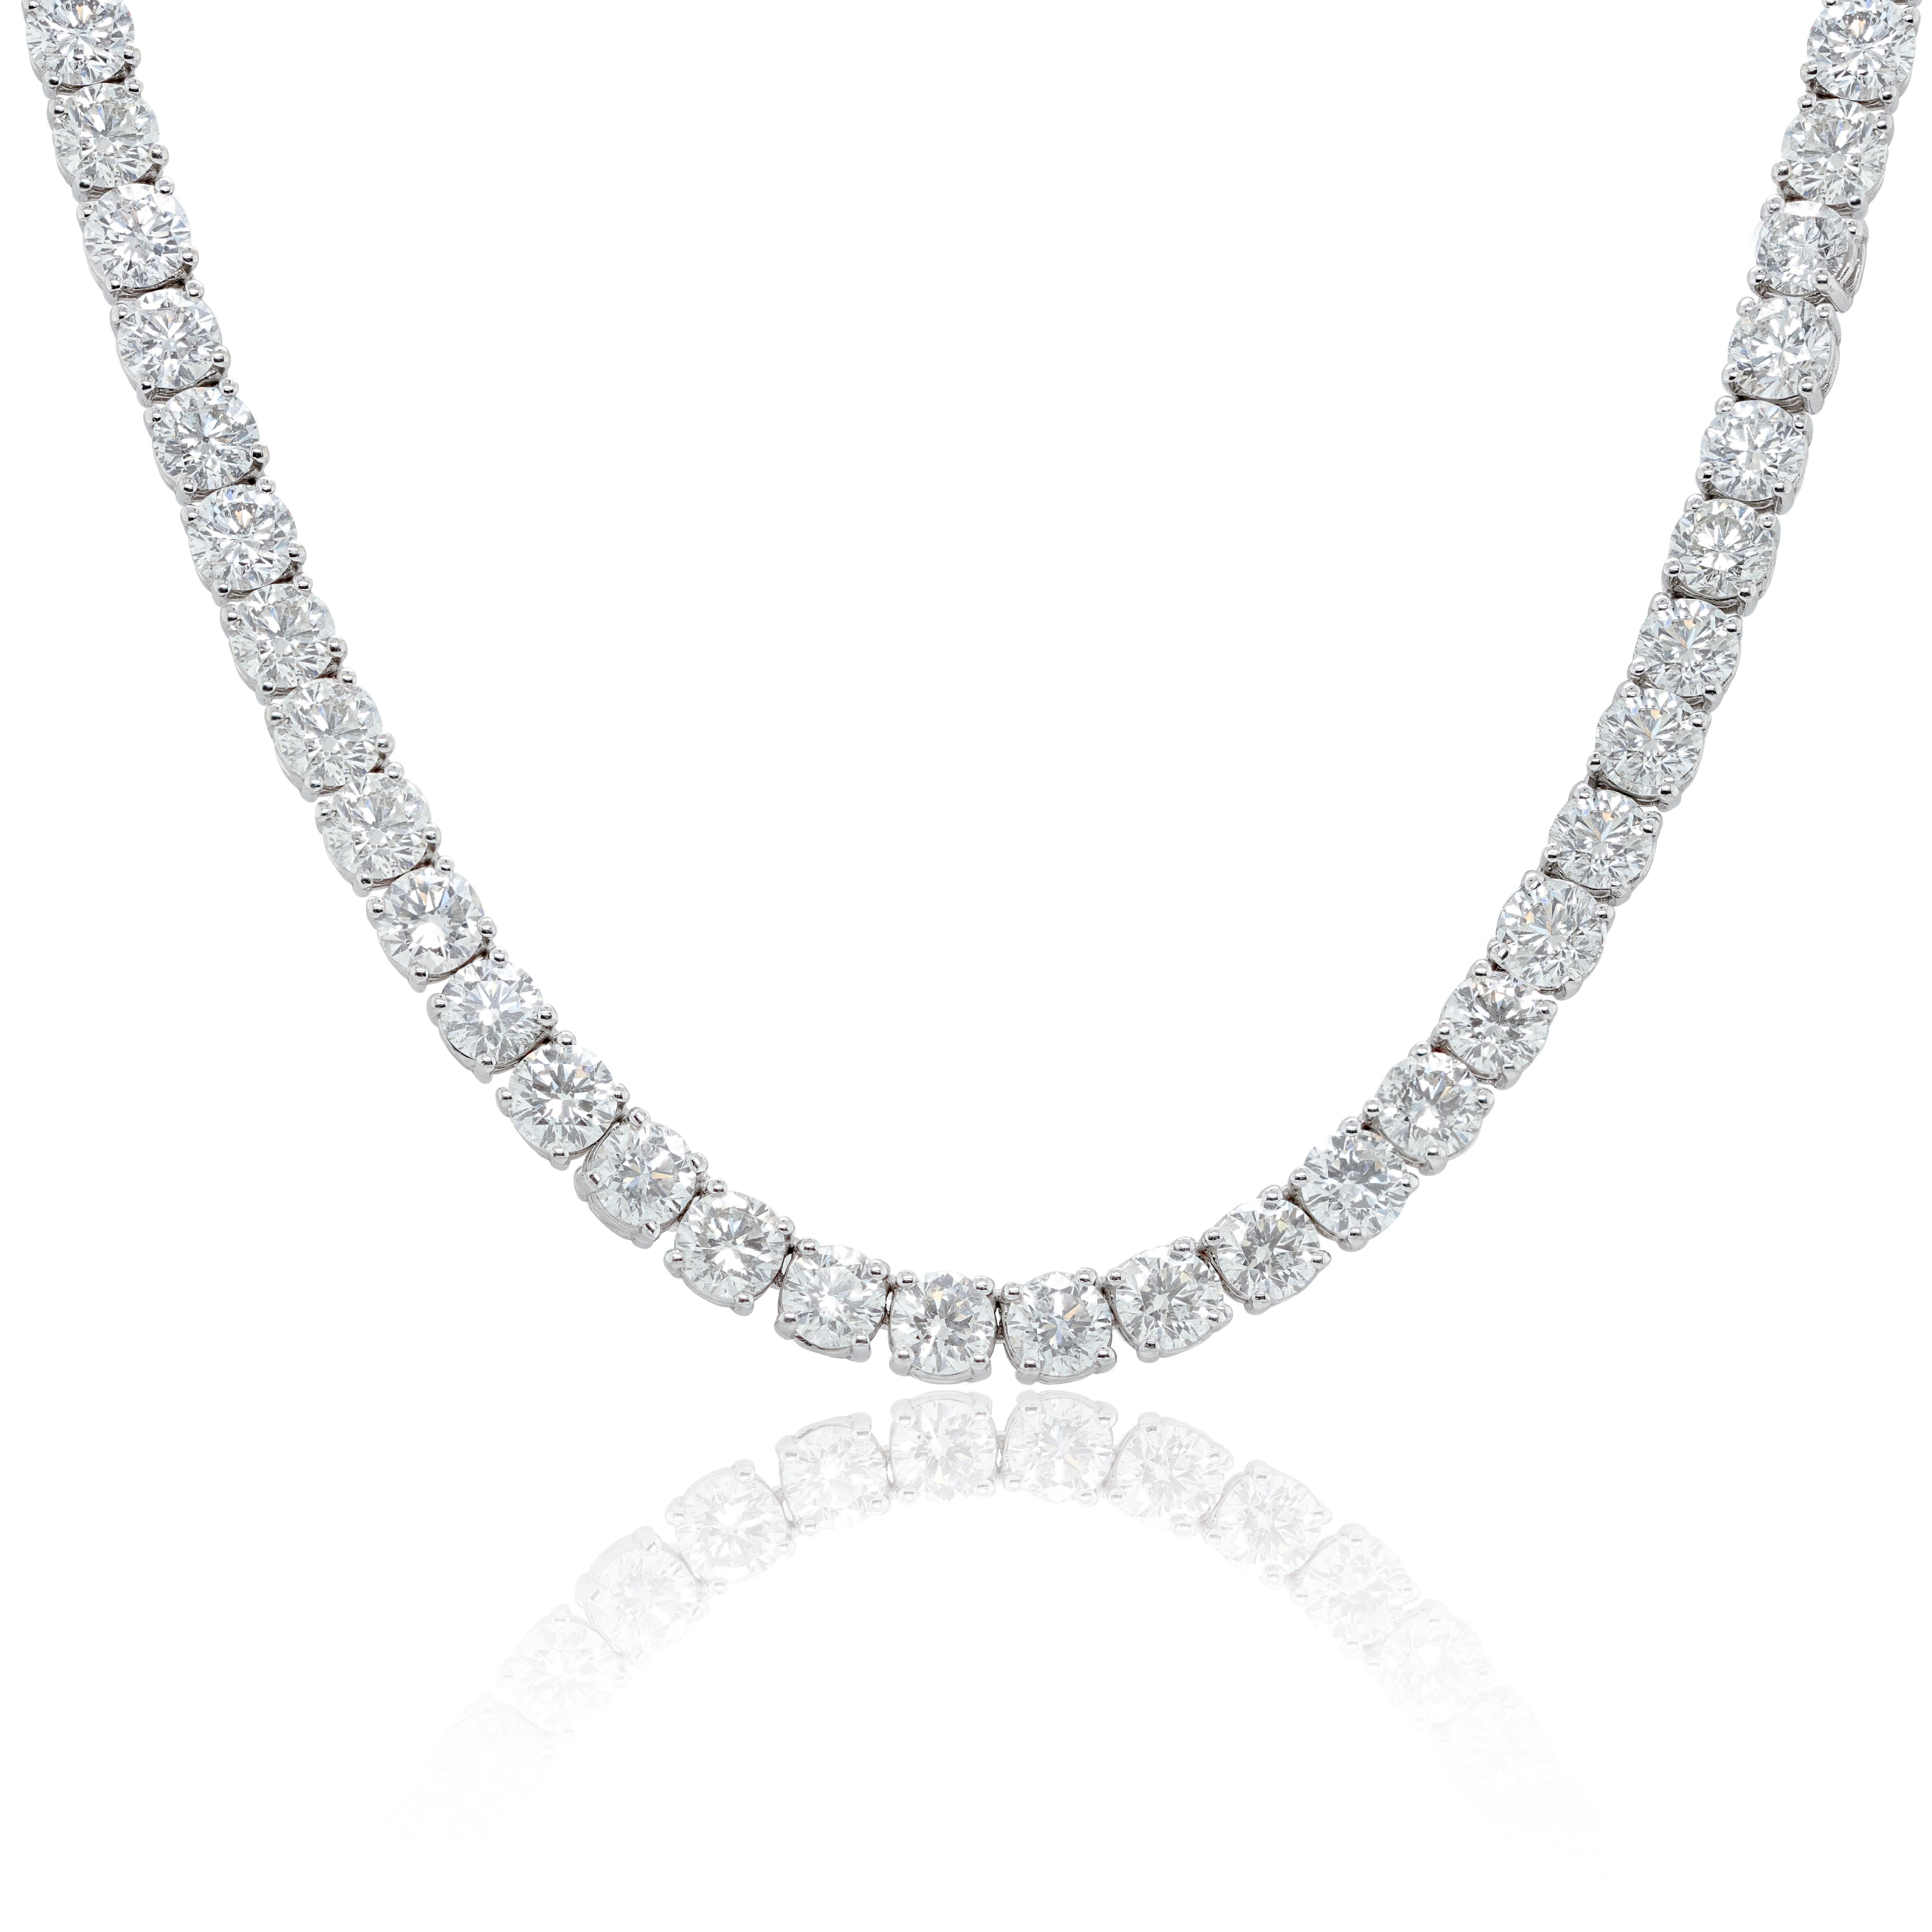 18KT white gold straight line tennis necklace features 40.80 cts of G-H color, SI clarity diamonds.

This product comes with a certificate of appraisal
This product will be packaged in a custom box

Composition:
18K white gold
40.80 cts white